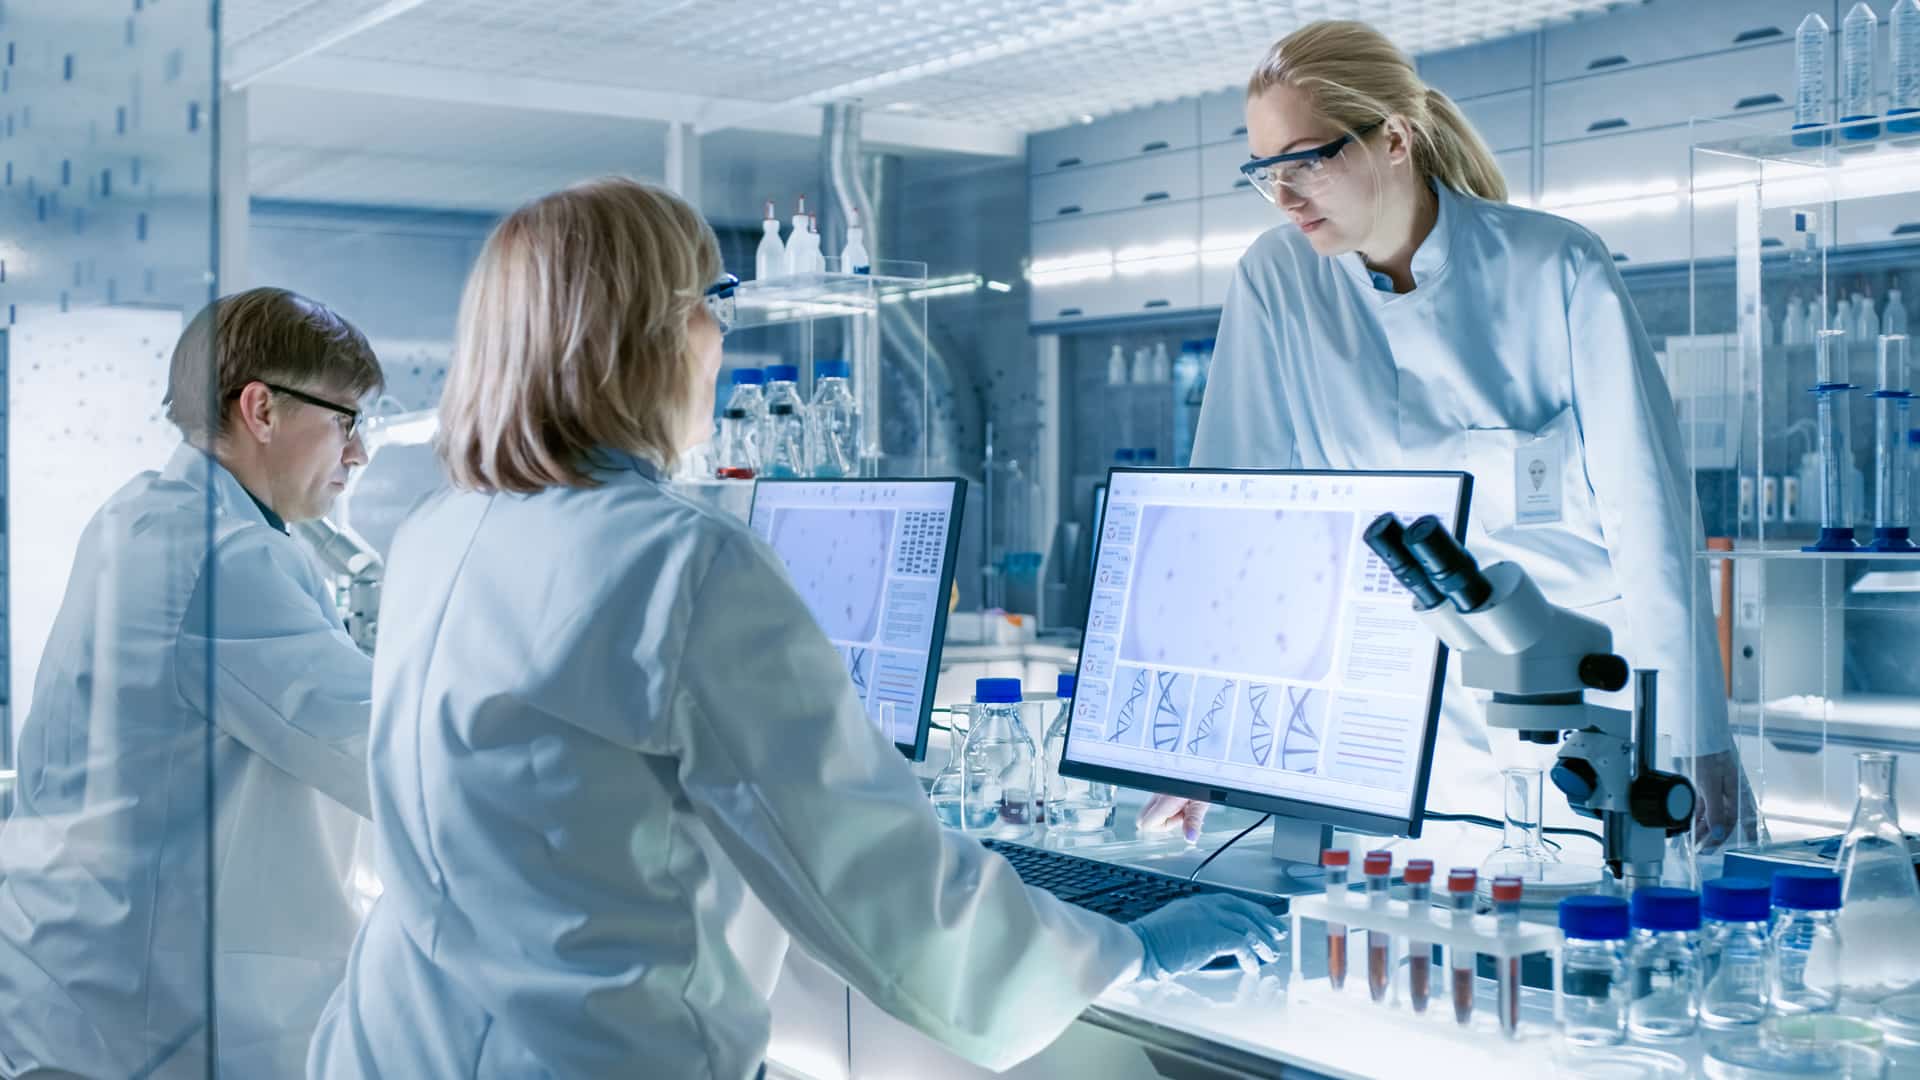 Lab technicians working on computers